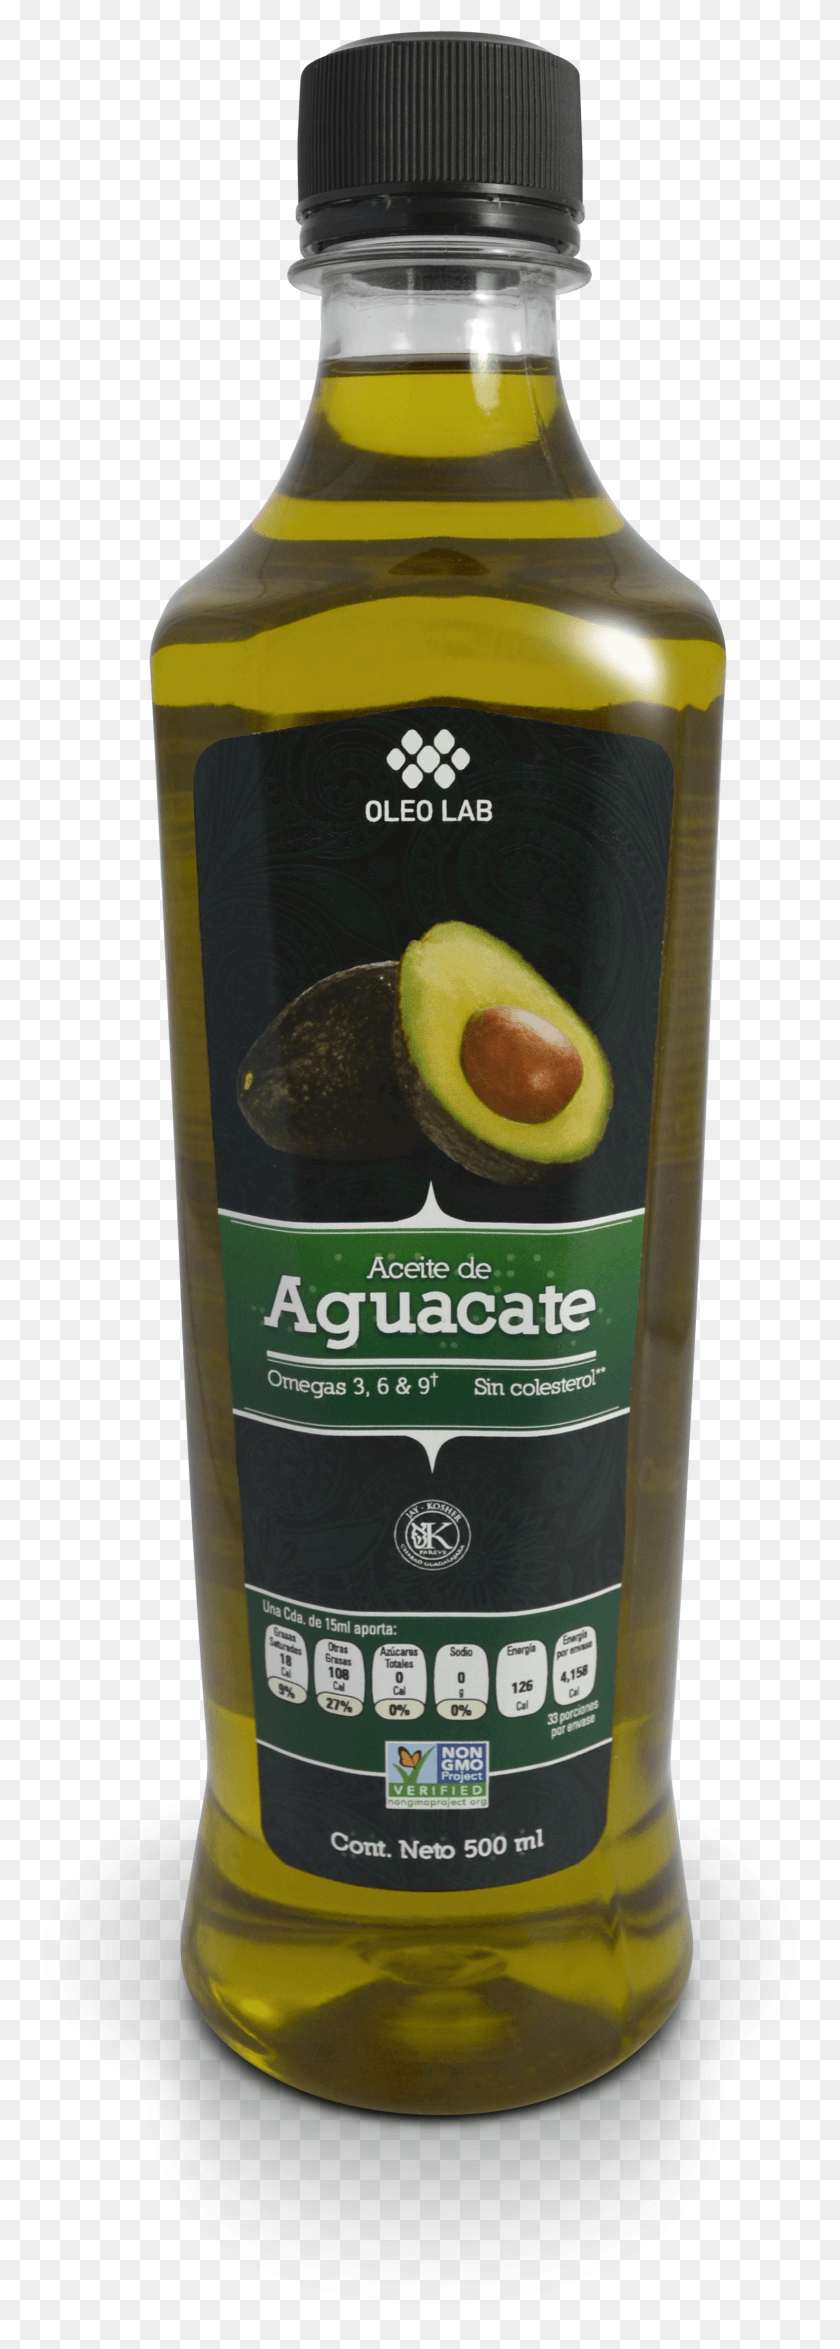 1478x4339 Oleolab Aceite Aguacate 500 Мл Aceite De Aguacate Extra Virgen Hd Png Скачать